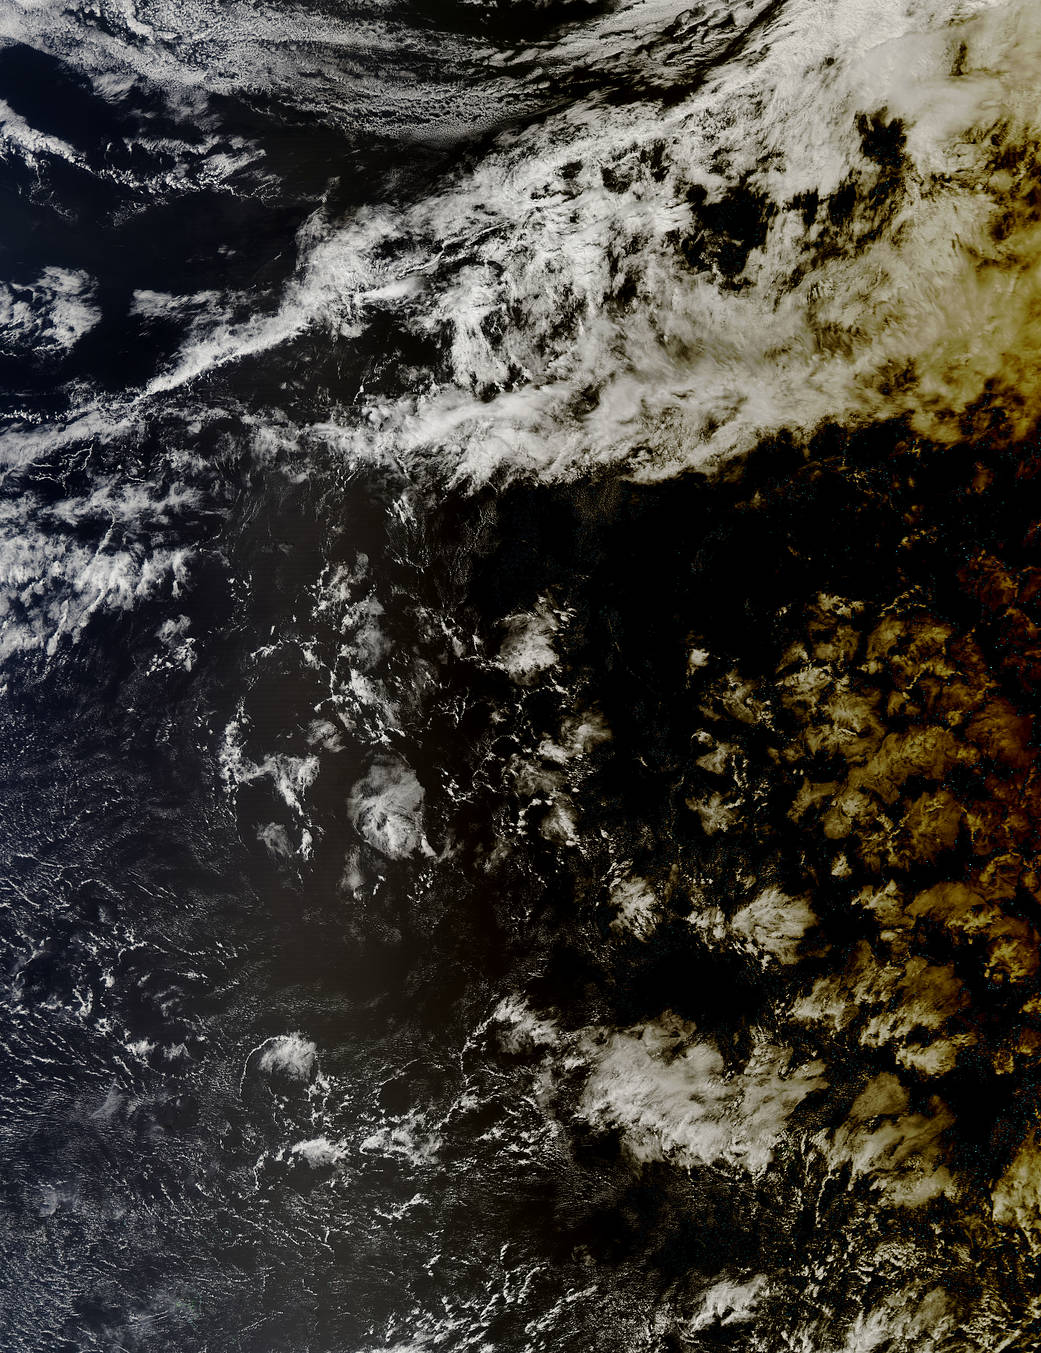 Clouds over the ocean gradually shaded darker at right as solar eclipse begins to move across